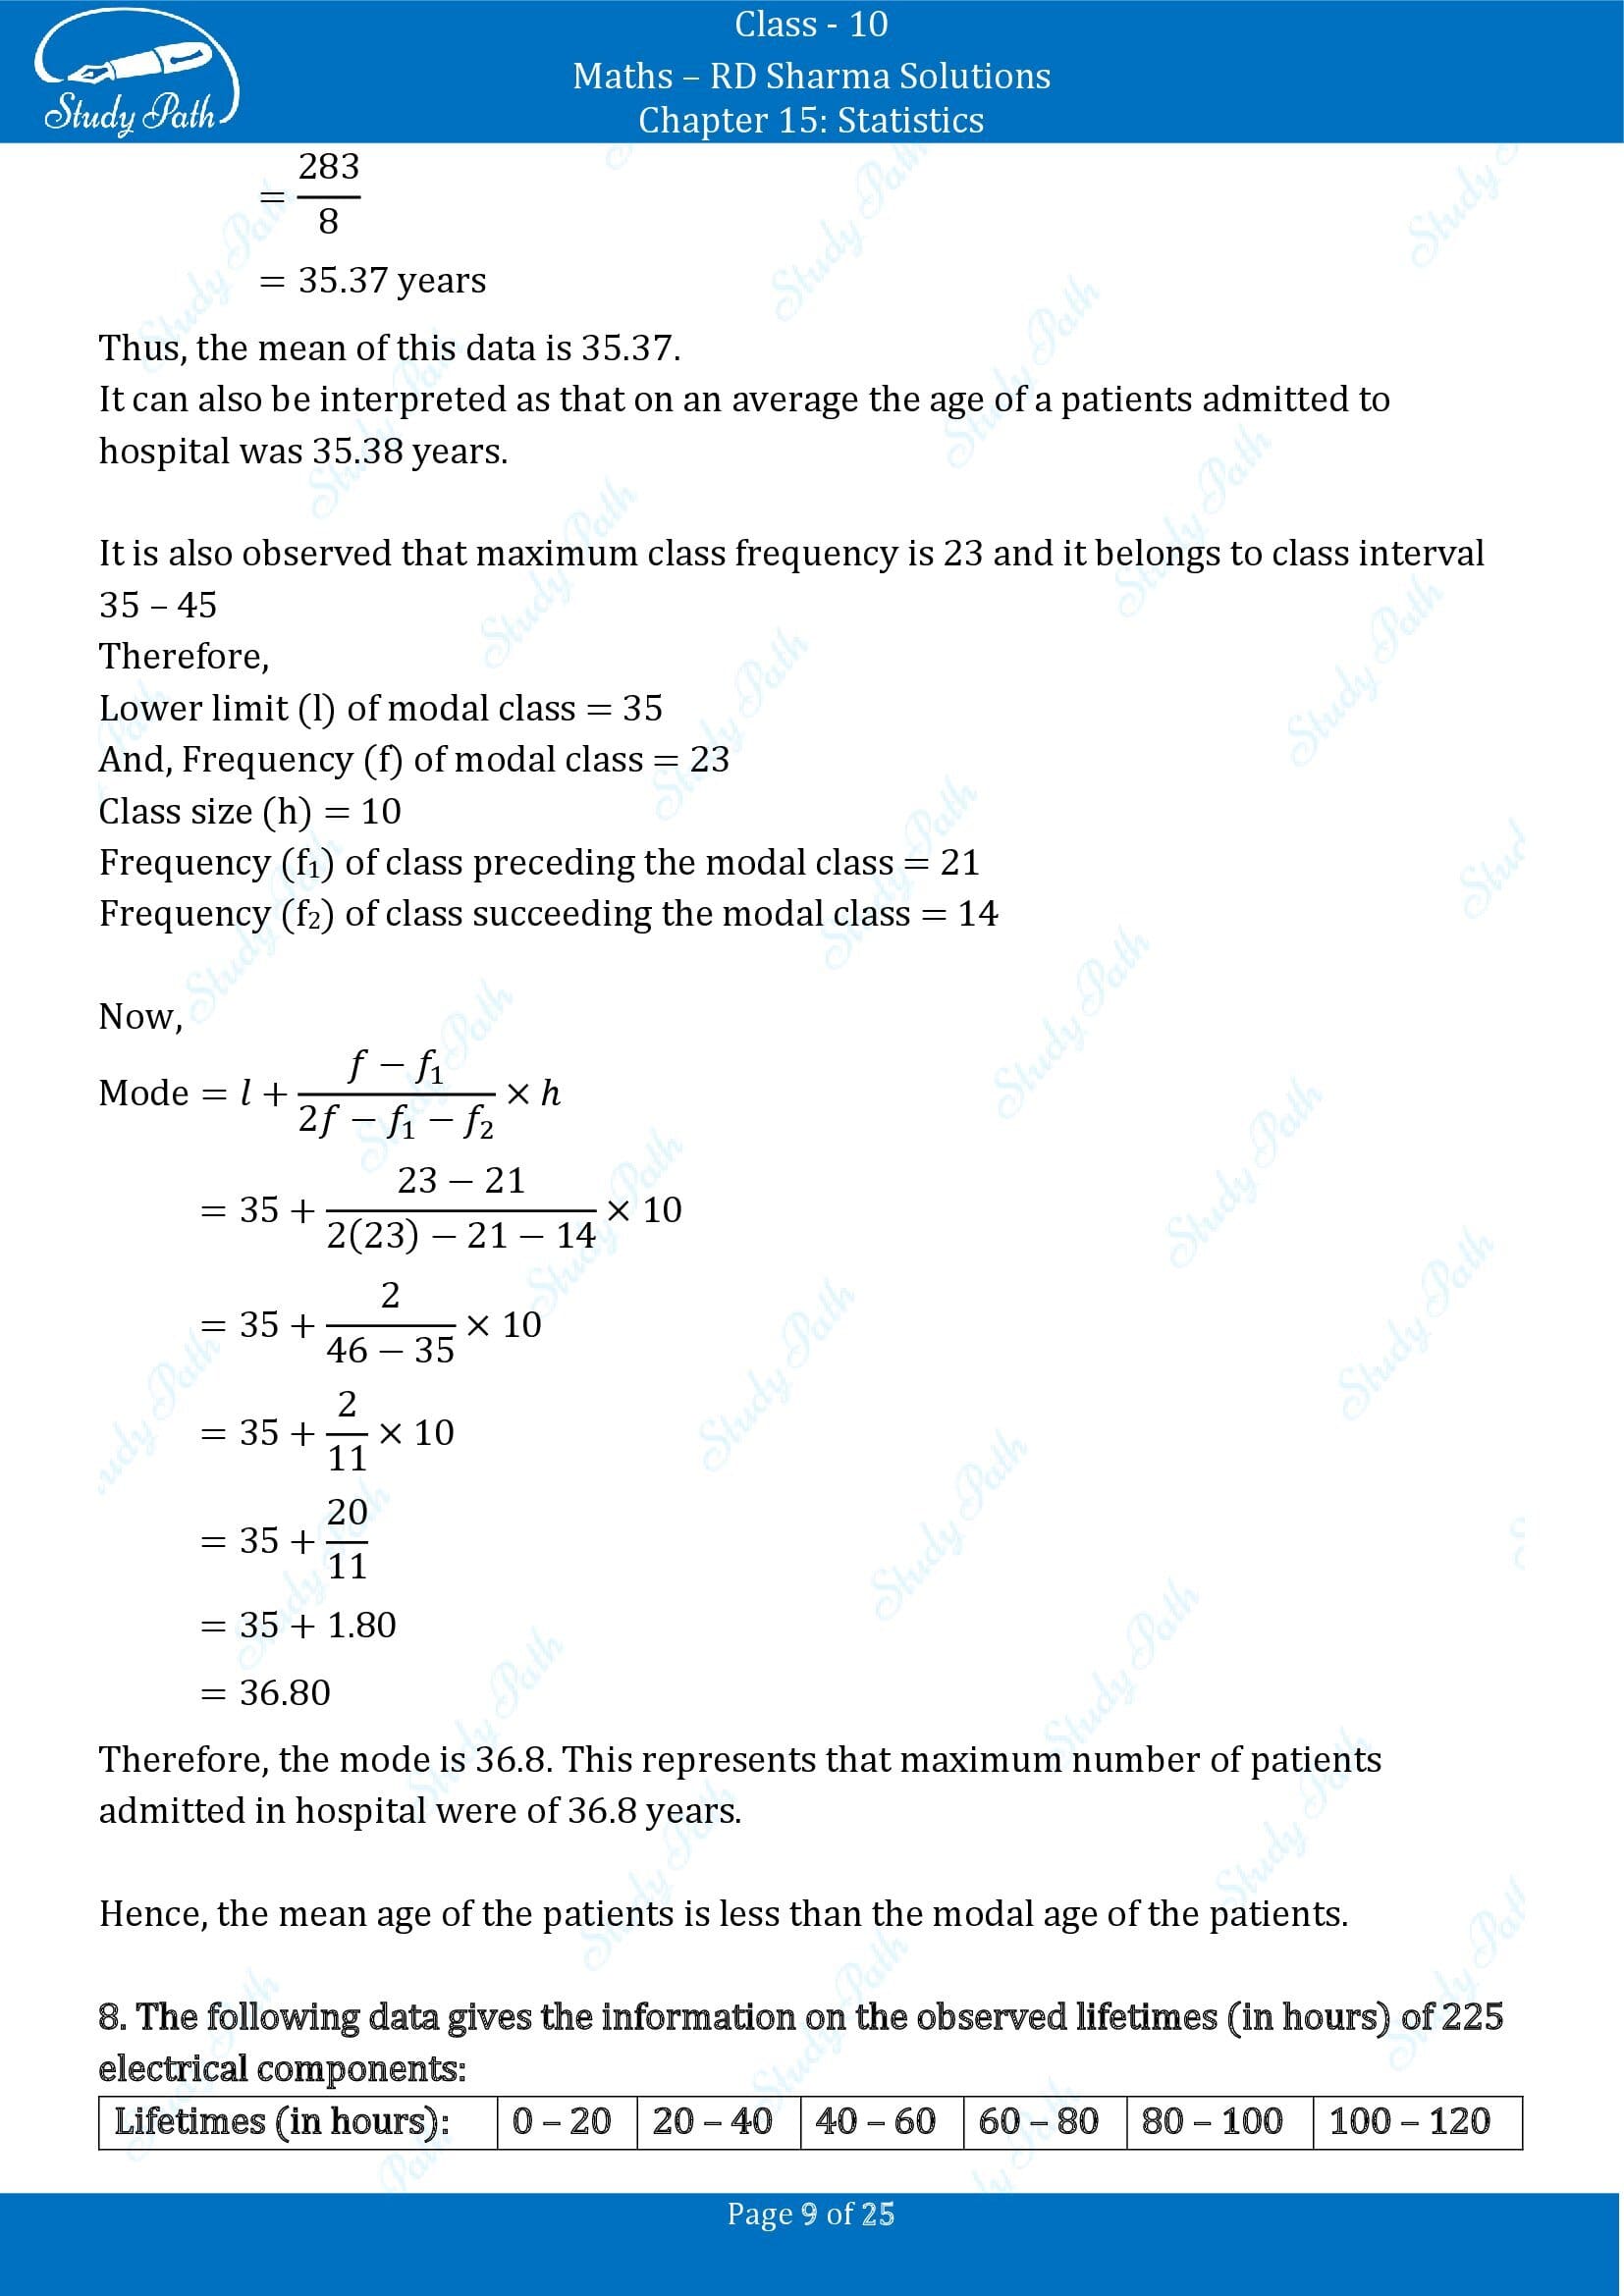 RD Sharma Solutions Class 10 Chapter 15 Statistics Exercise 15.5 00009